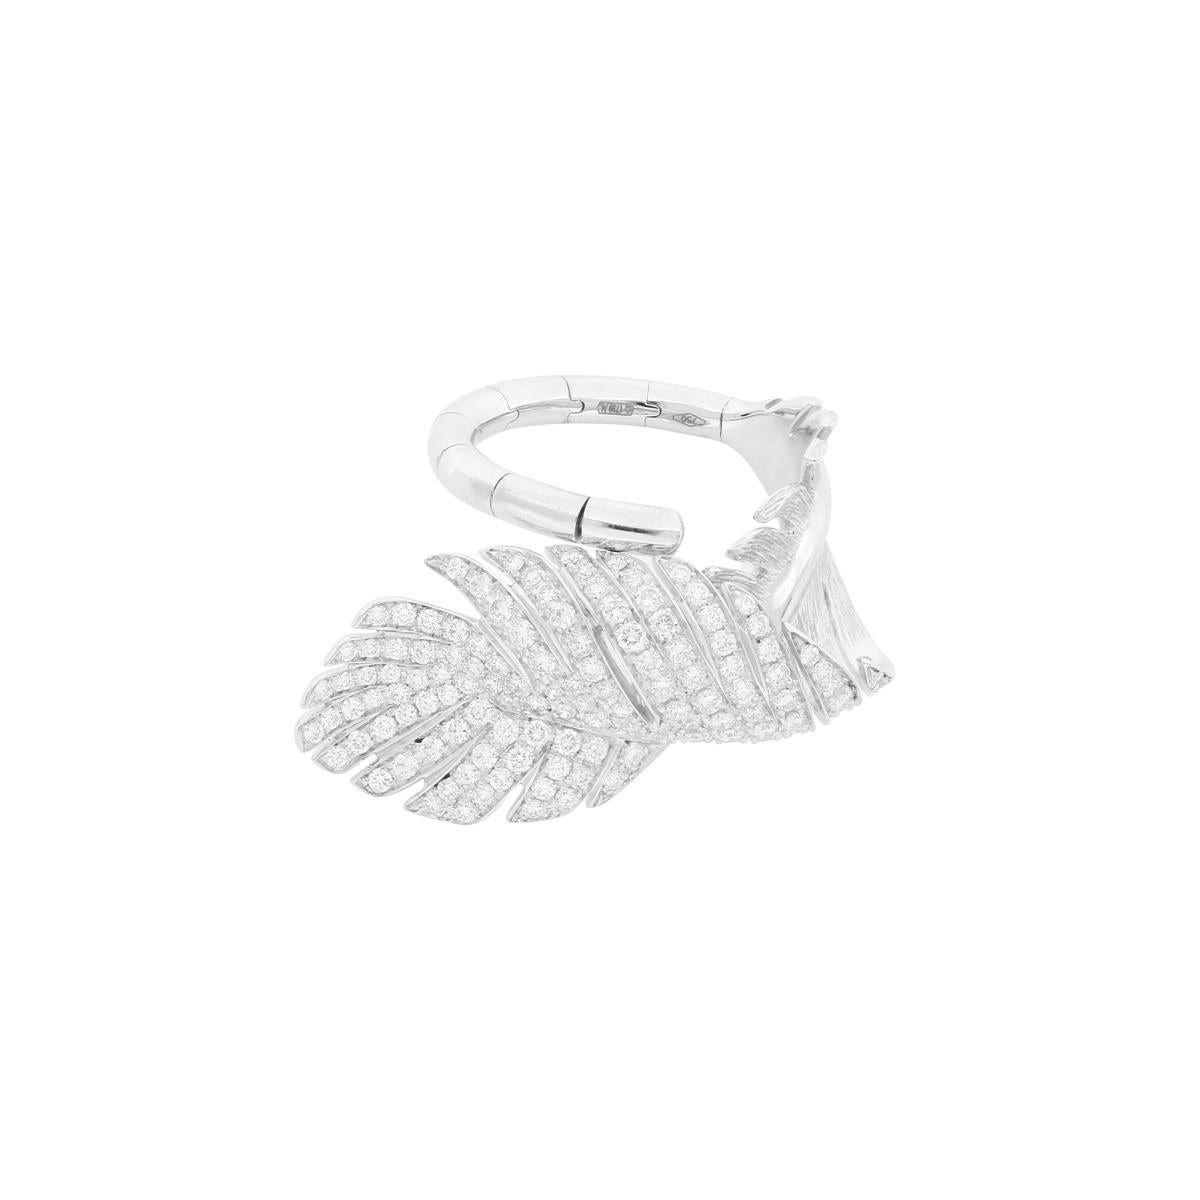 Truly as light as a feather, this 18K white gold ring will sit on your finger so comfortably that you will forget taking it off. Not that you would ever want to, given its gorgeous design. The cut-out shape of the feather is realistic and delicate: